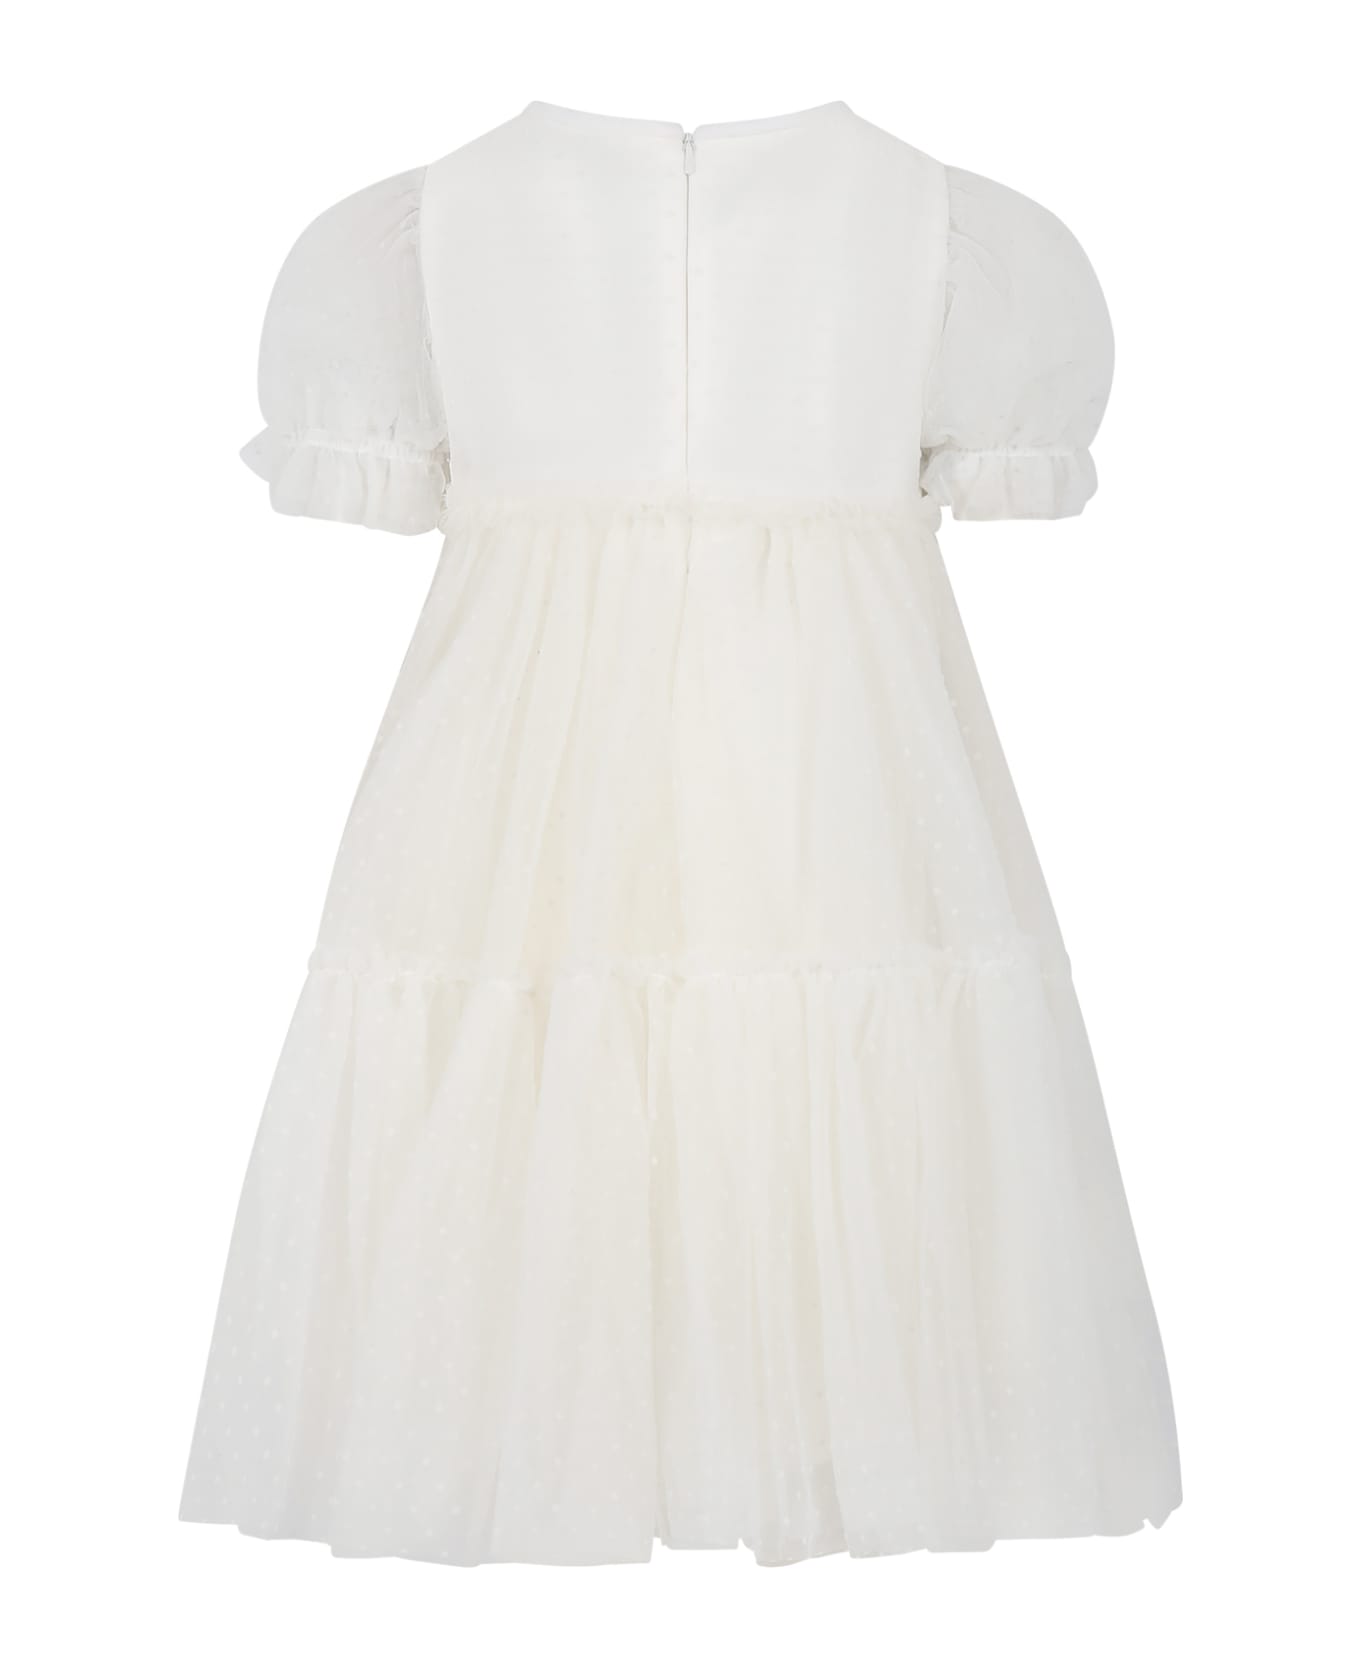 Monnalisa Ivory Dress For Girl With Polka Dots - Ivory